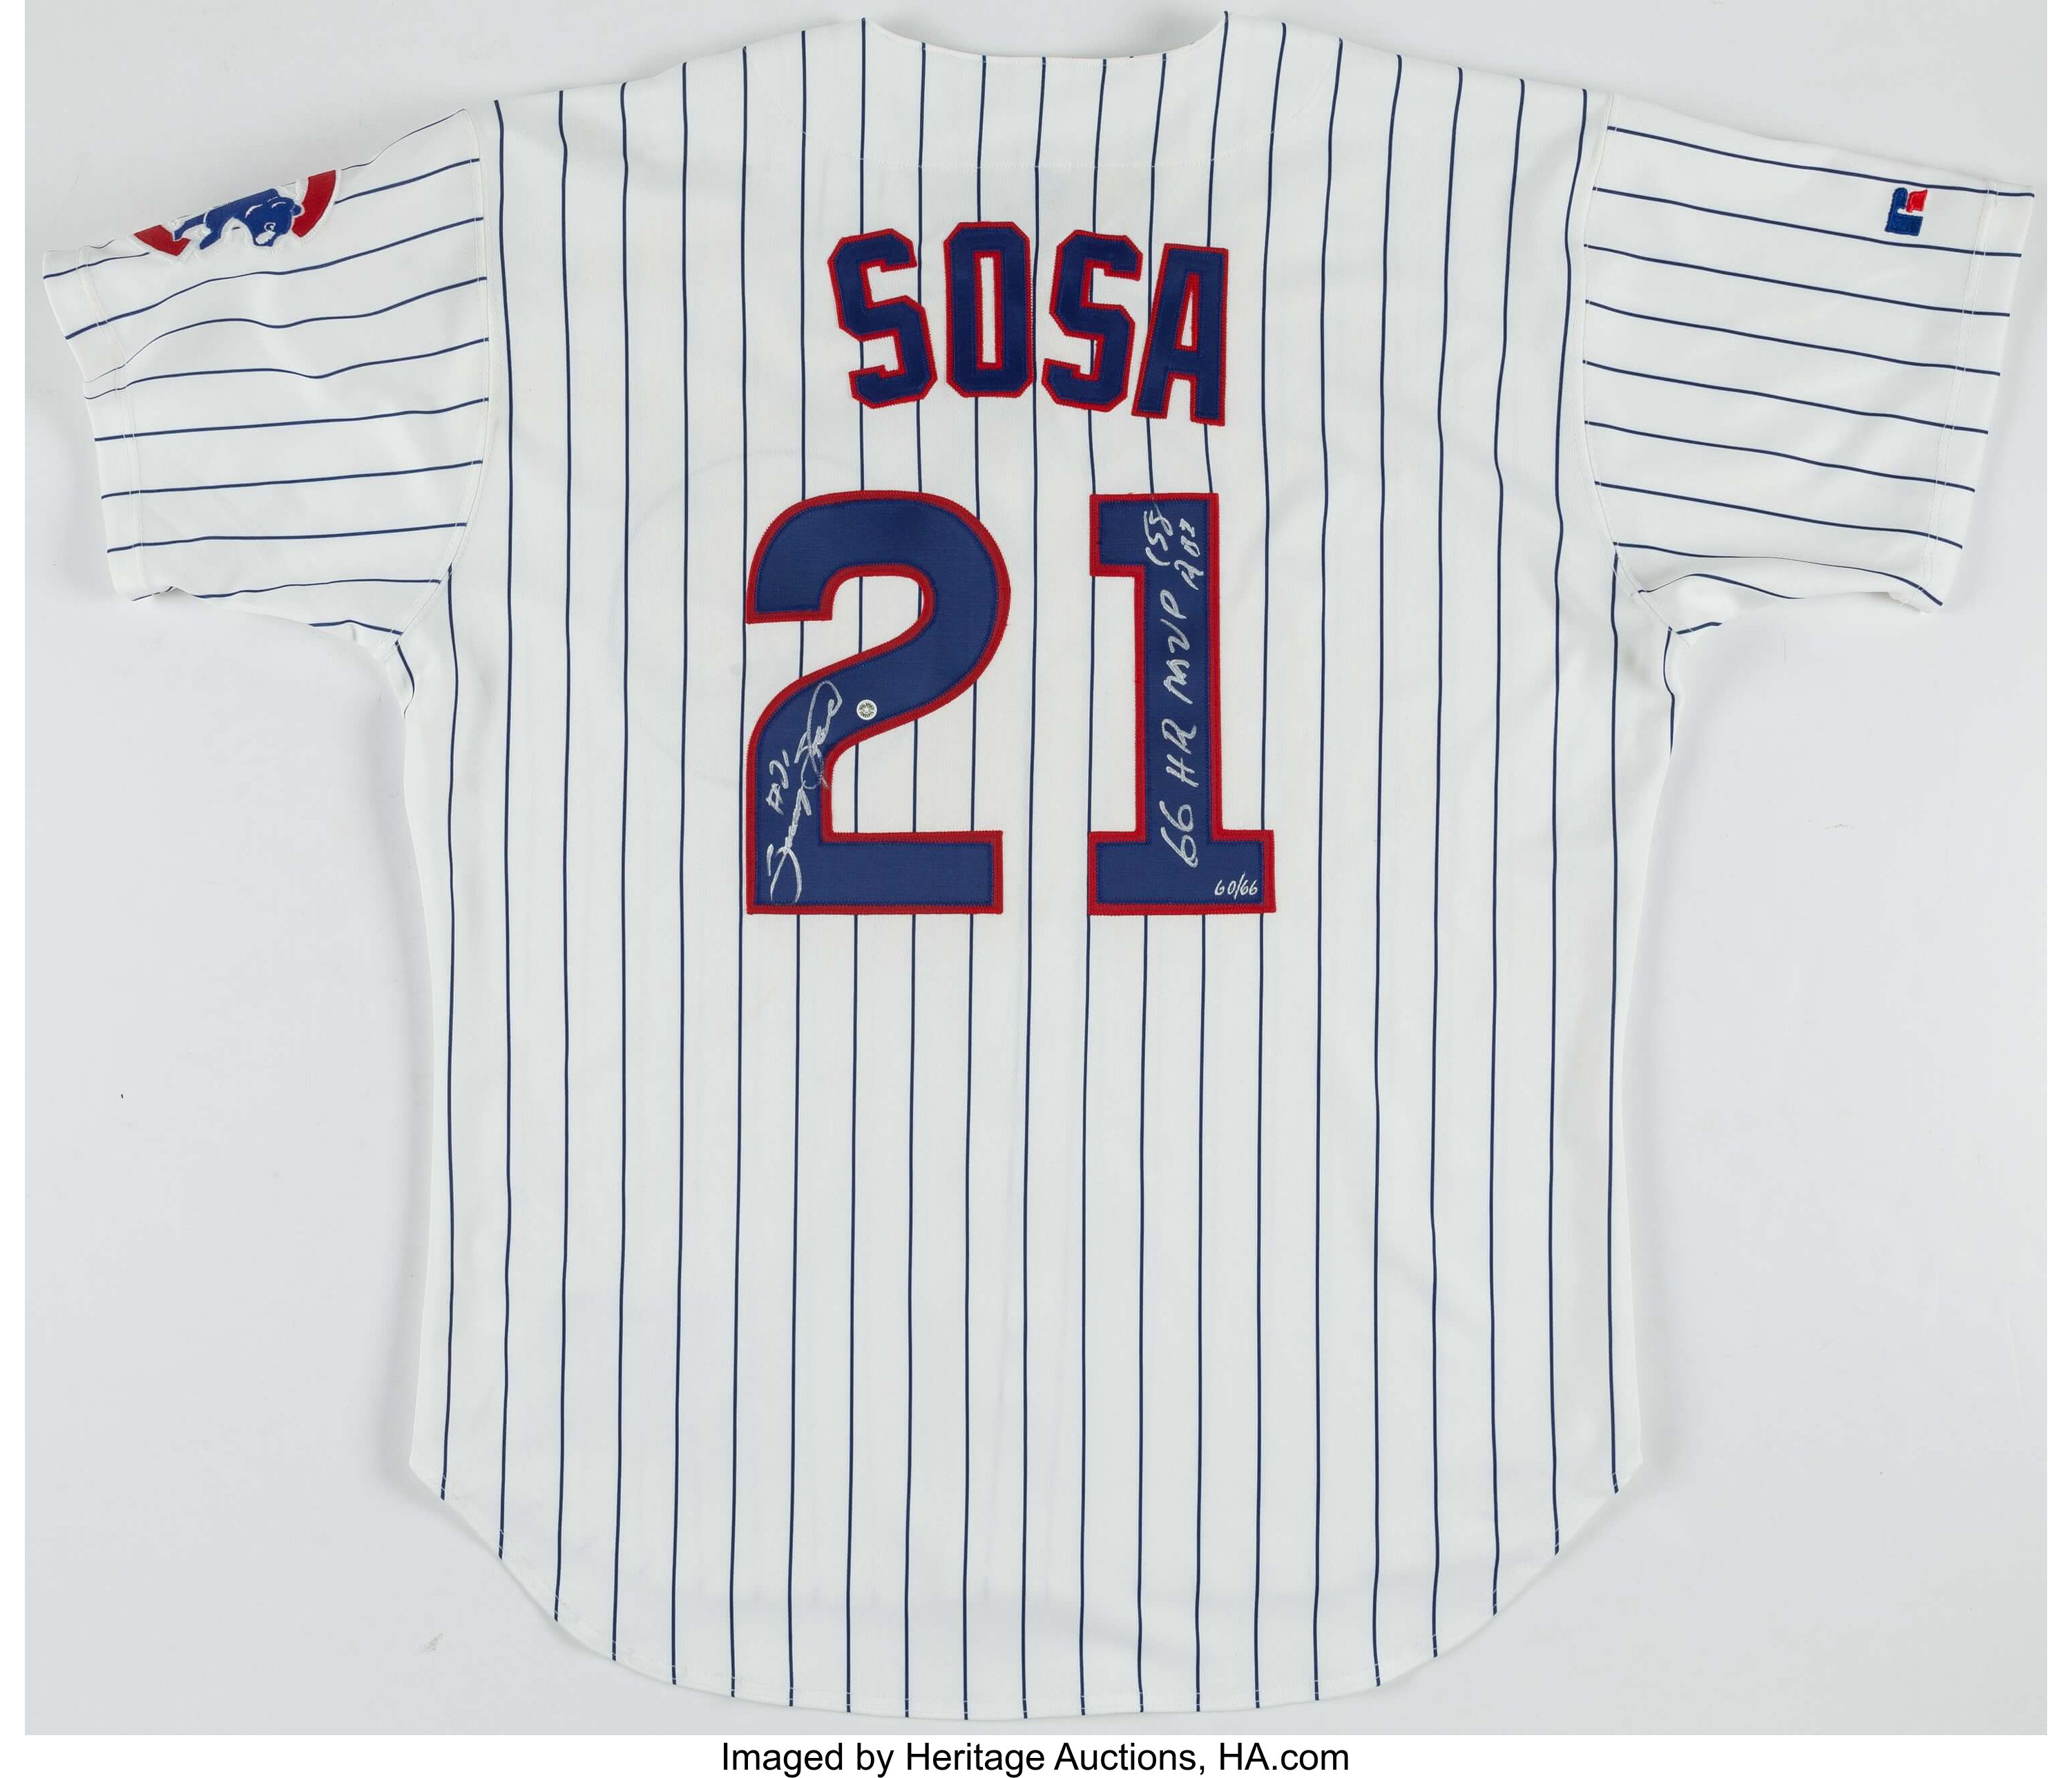 Sold at Auction: Sammy Sosa Signed Chicago Cubs Road Stat Jersey